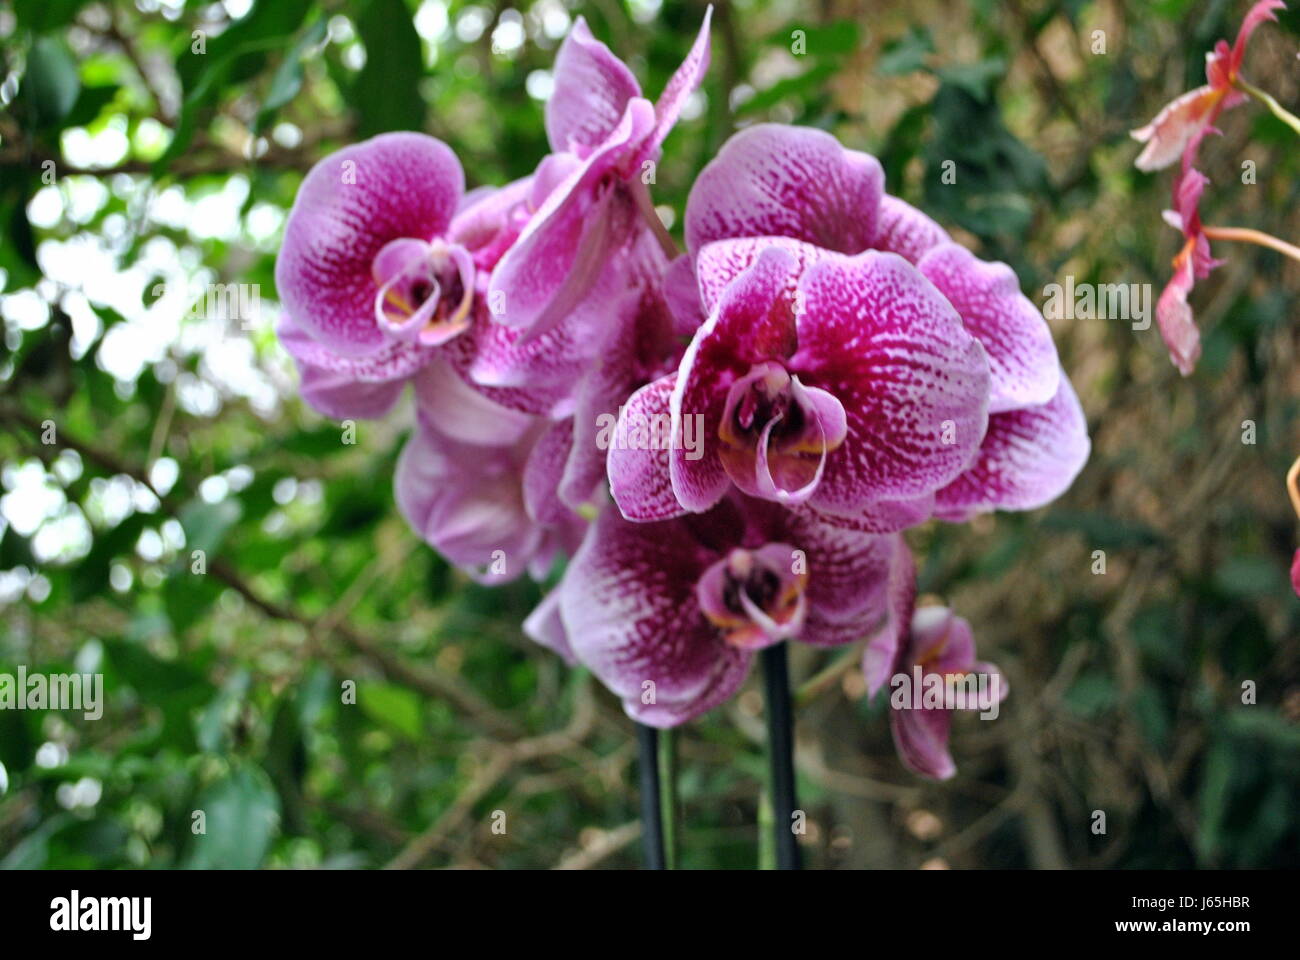 Orchid up close Stock Photo